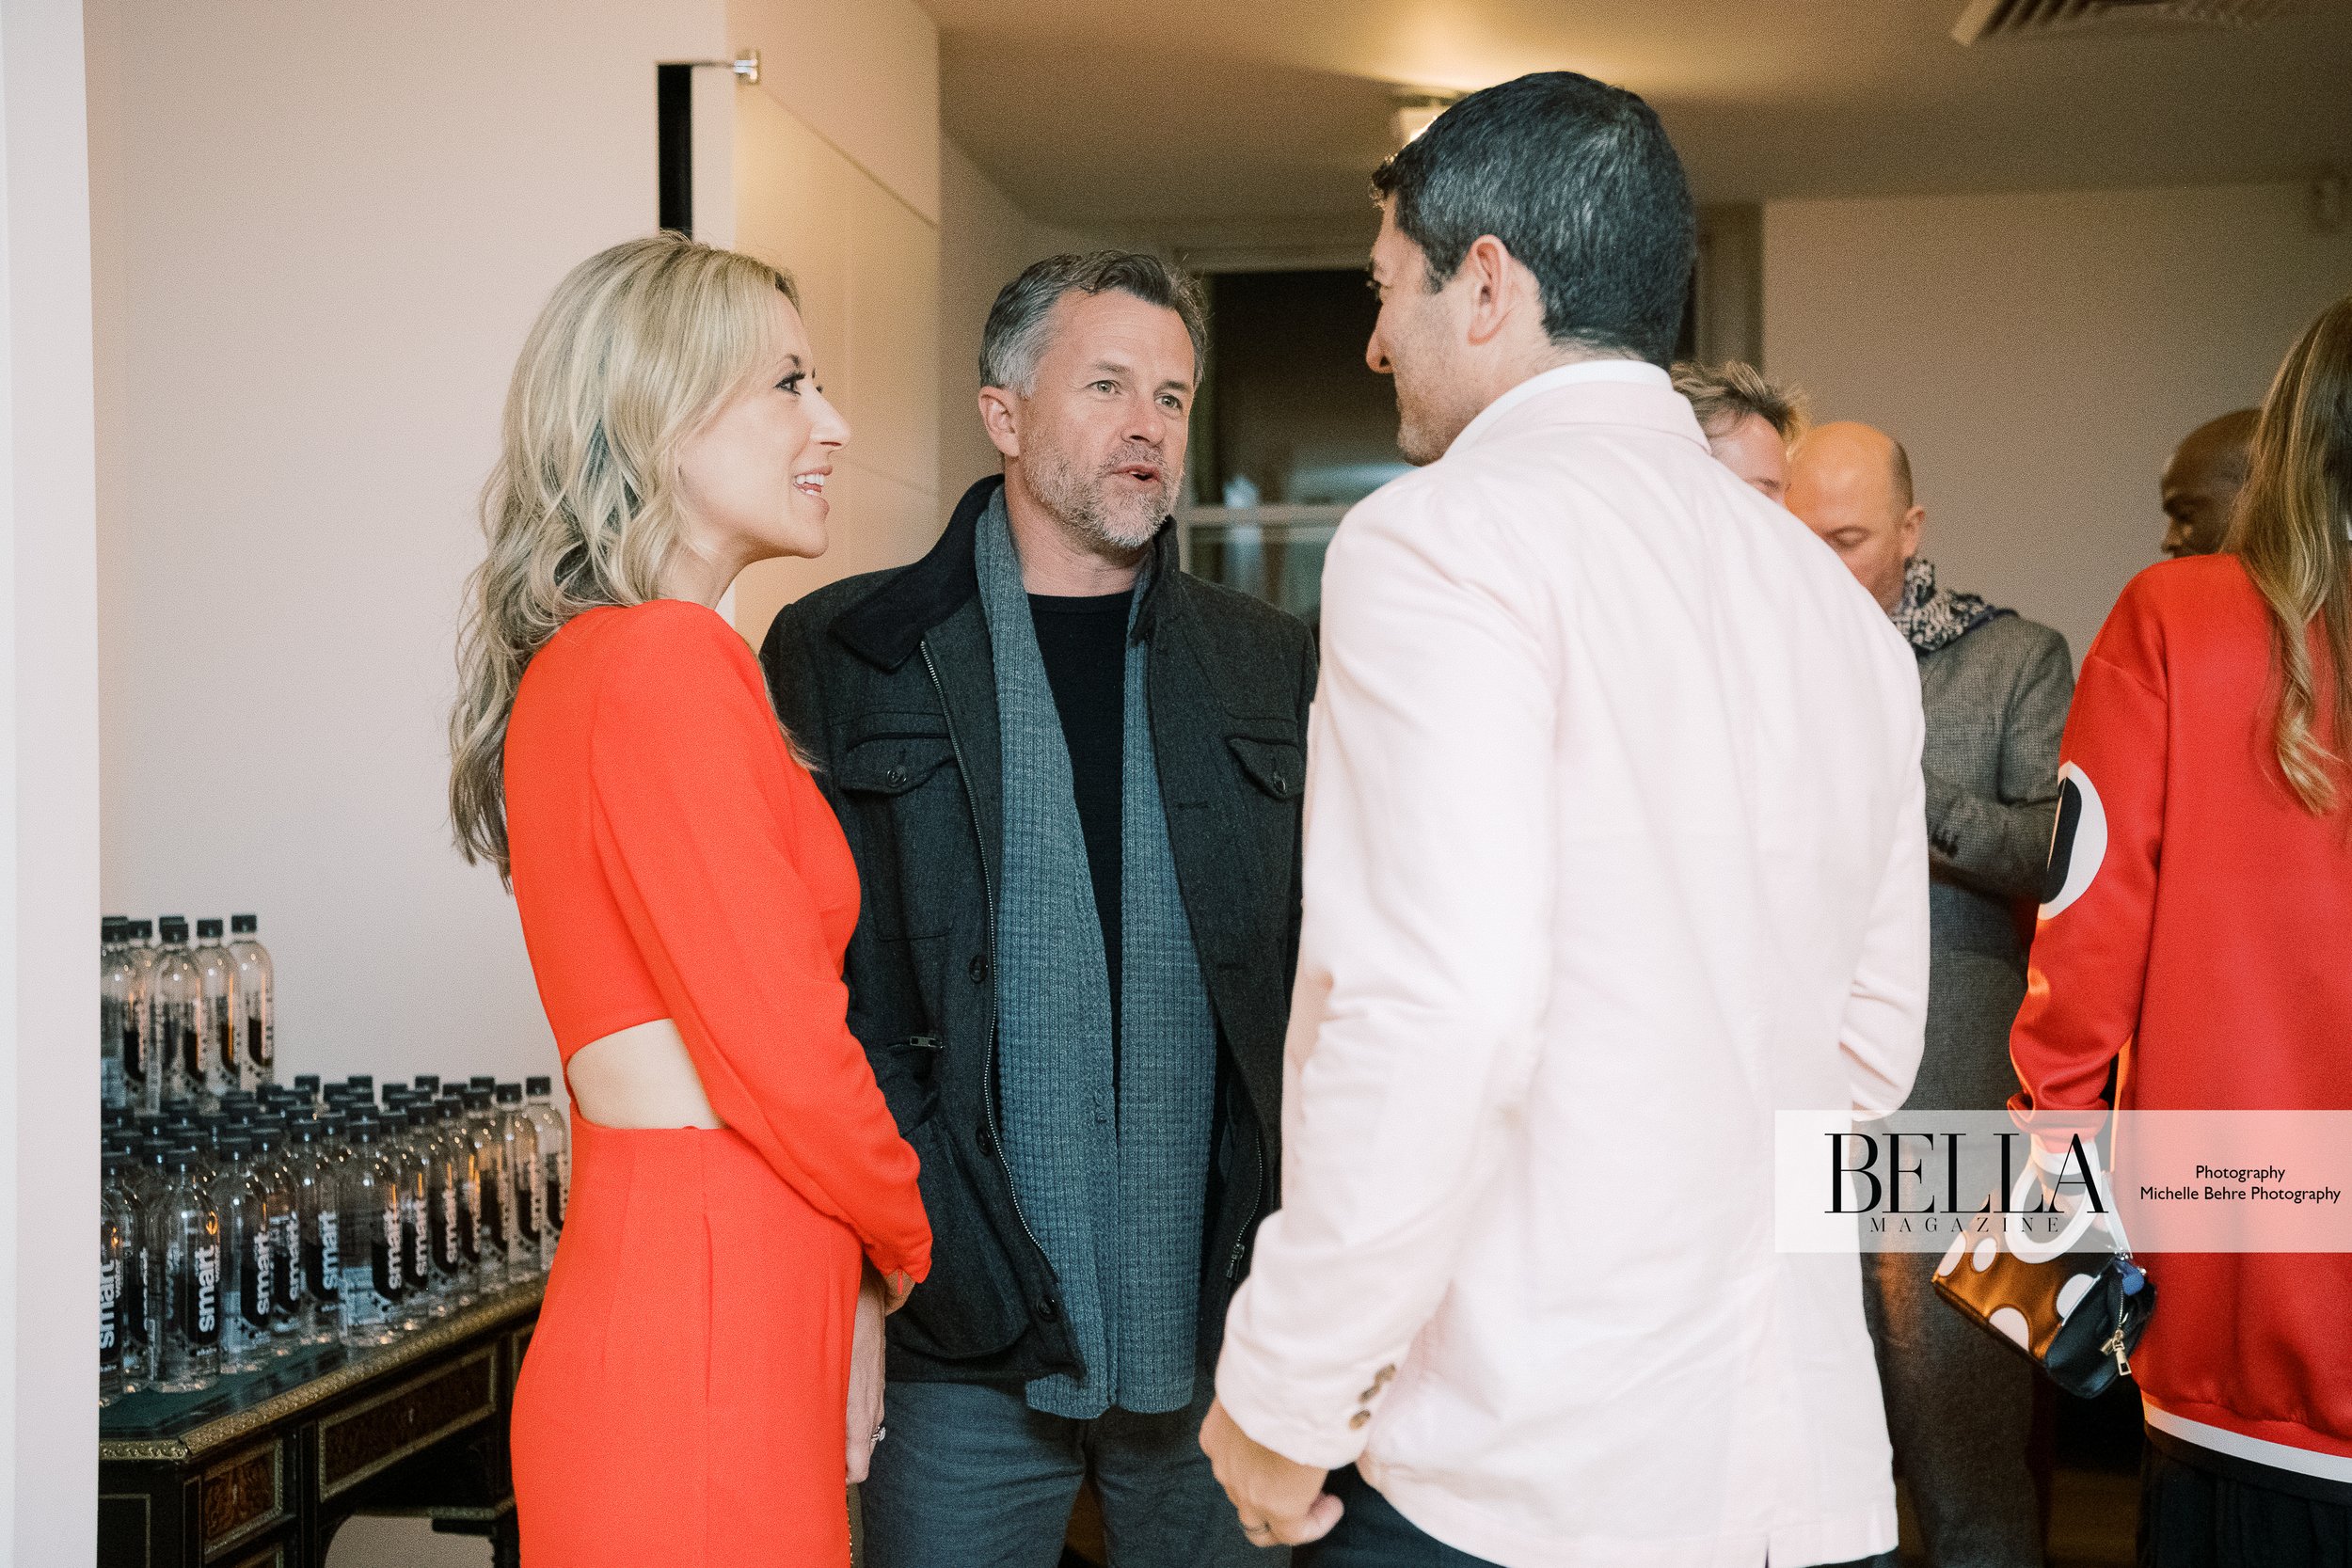 Michelle-Behre-Photography-Watermarked-2024-BELLA-MAGAZINE-BELLA-AT-Relationship-Issue-Cover-Party-Helen-Yarmak-187.jpg